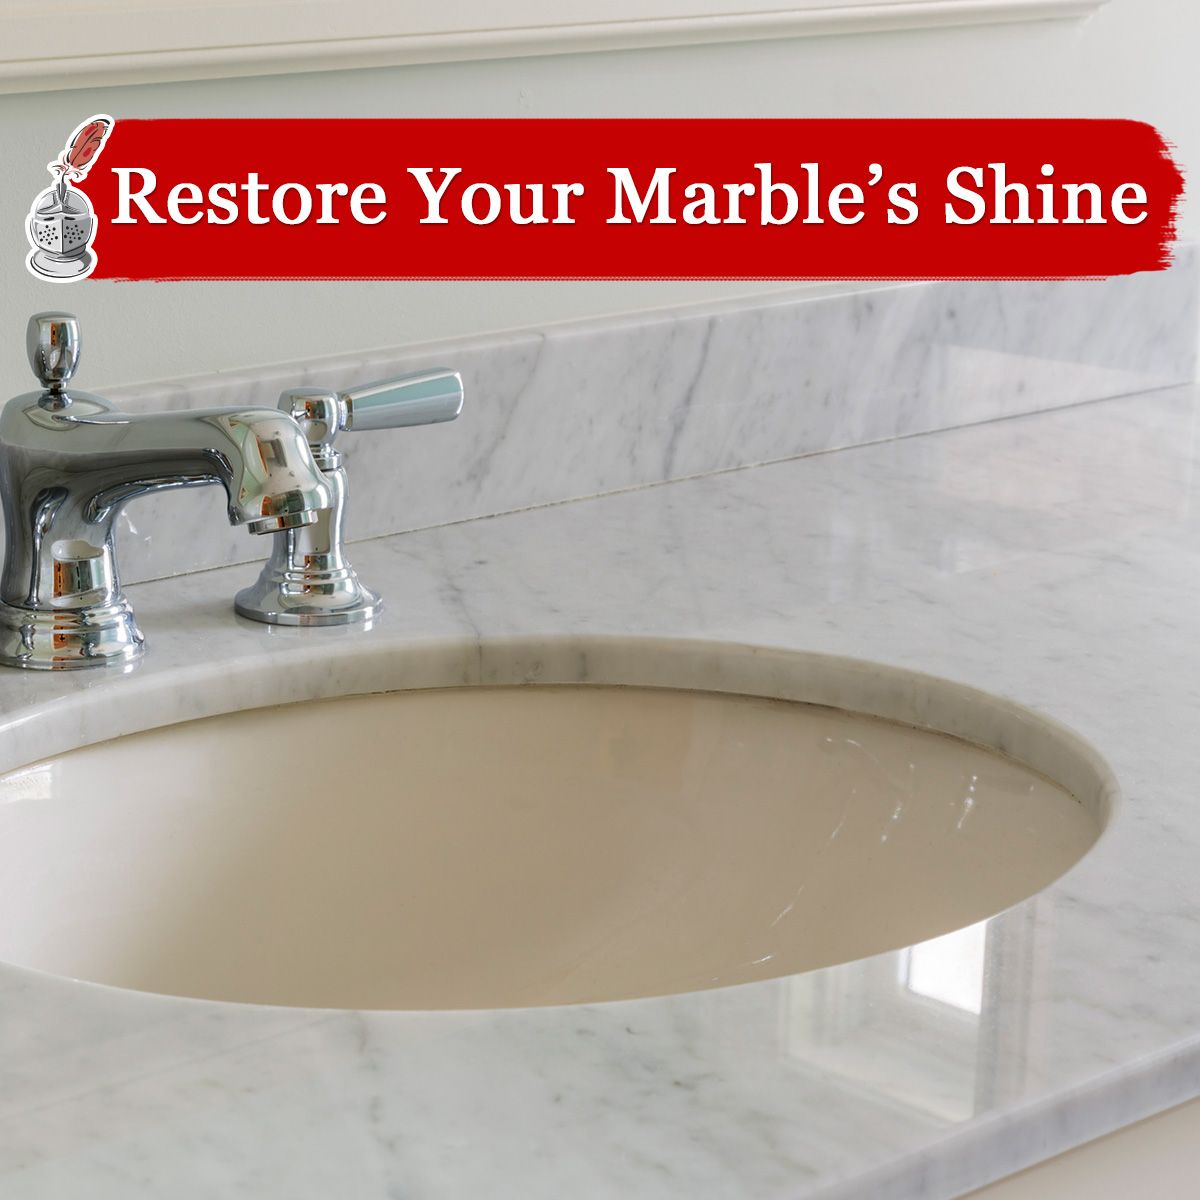 Restore Your Marble's Shine